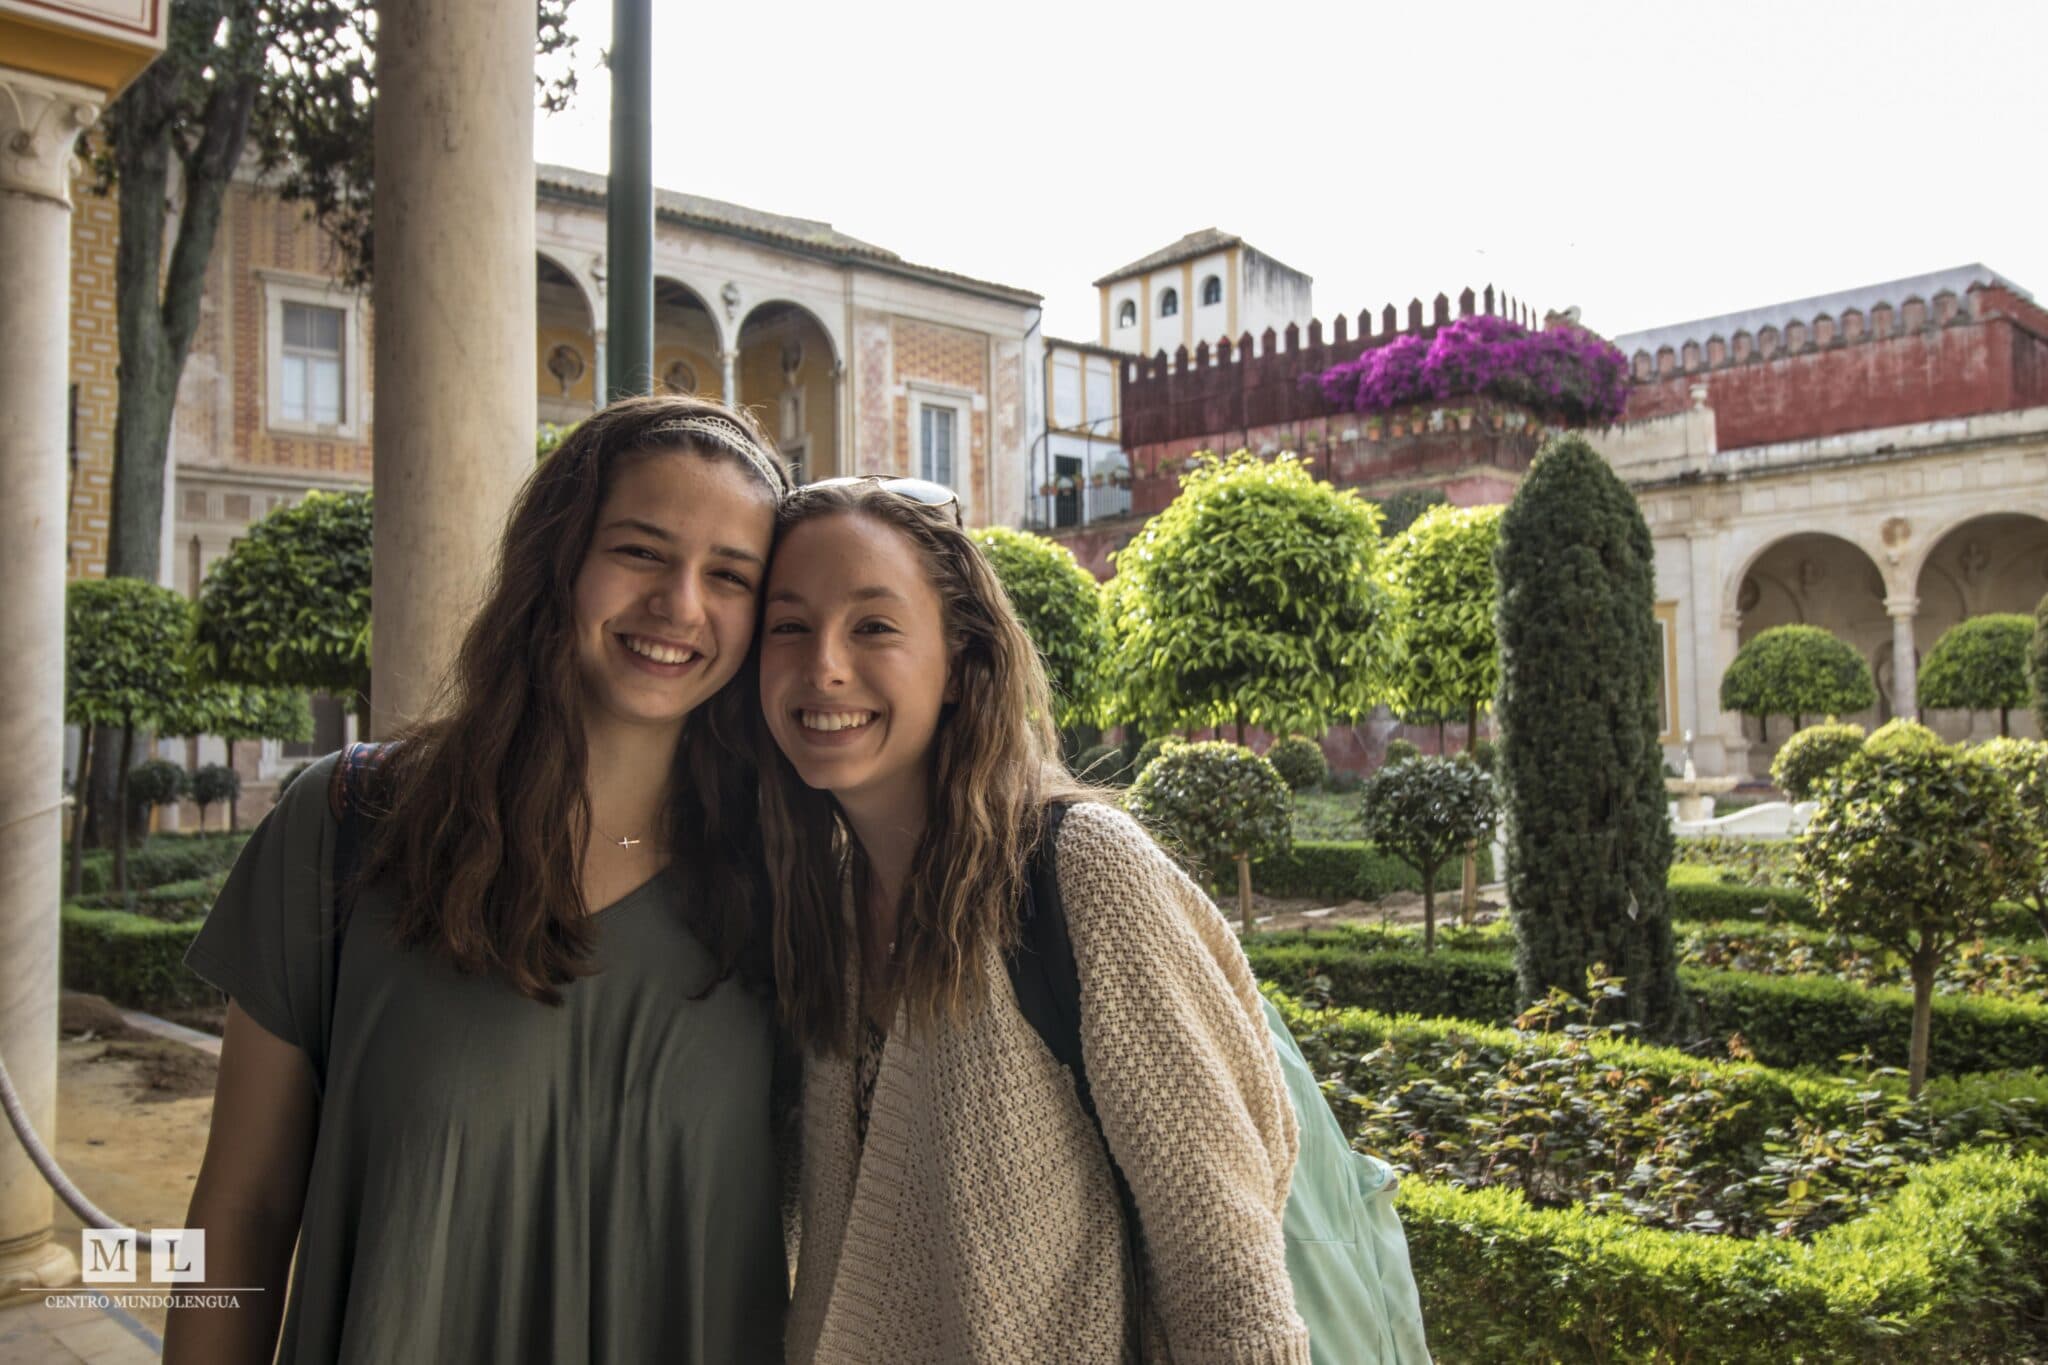 Taking a gap year abroad in Spain